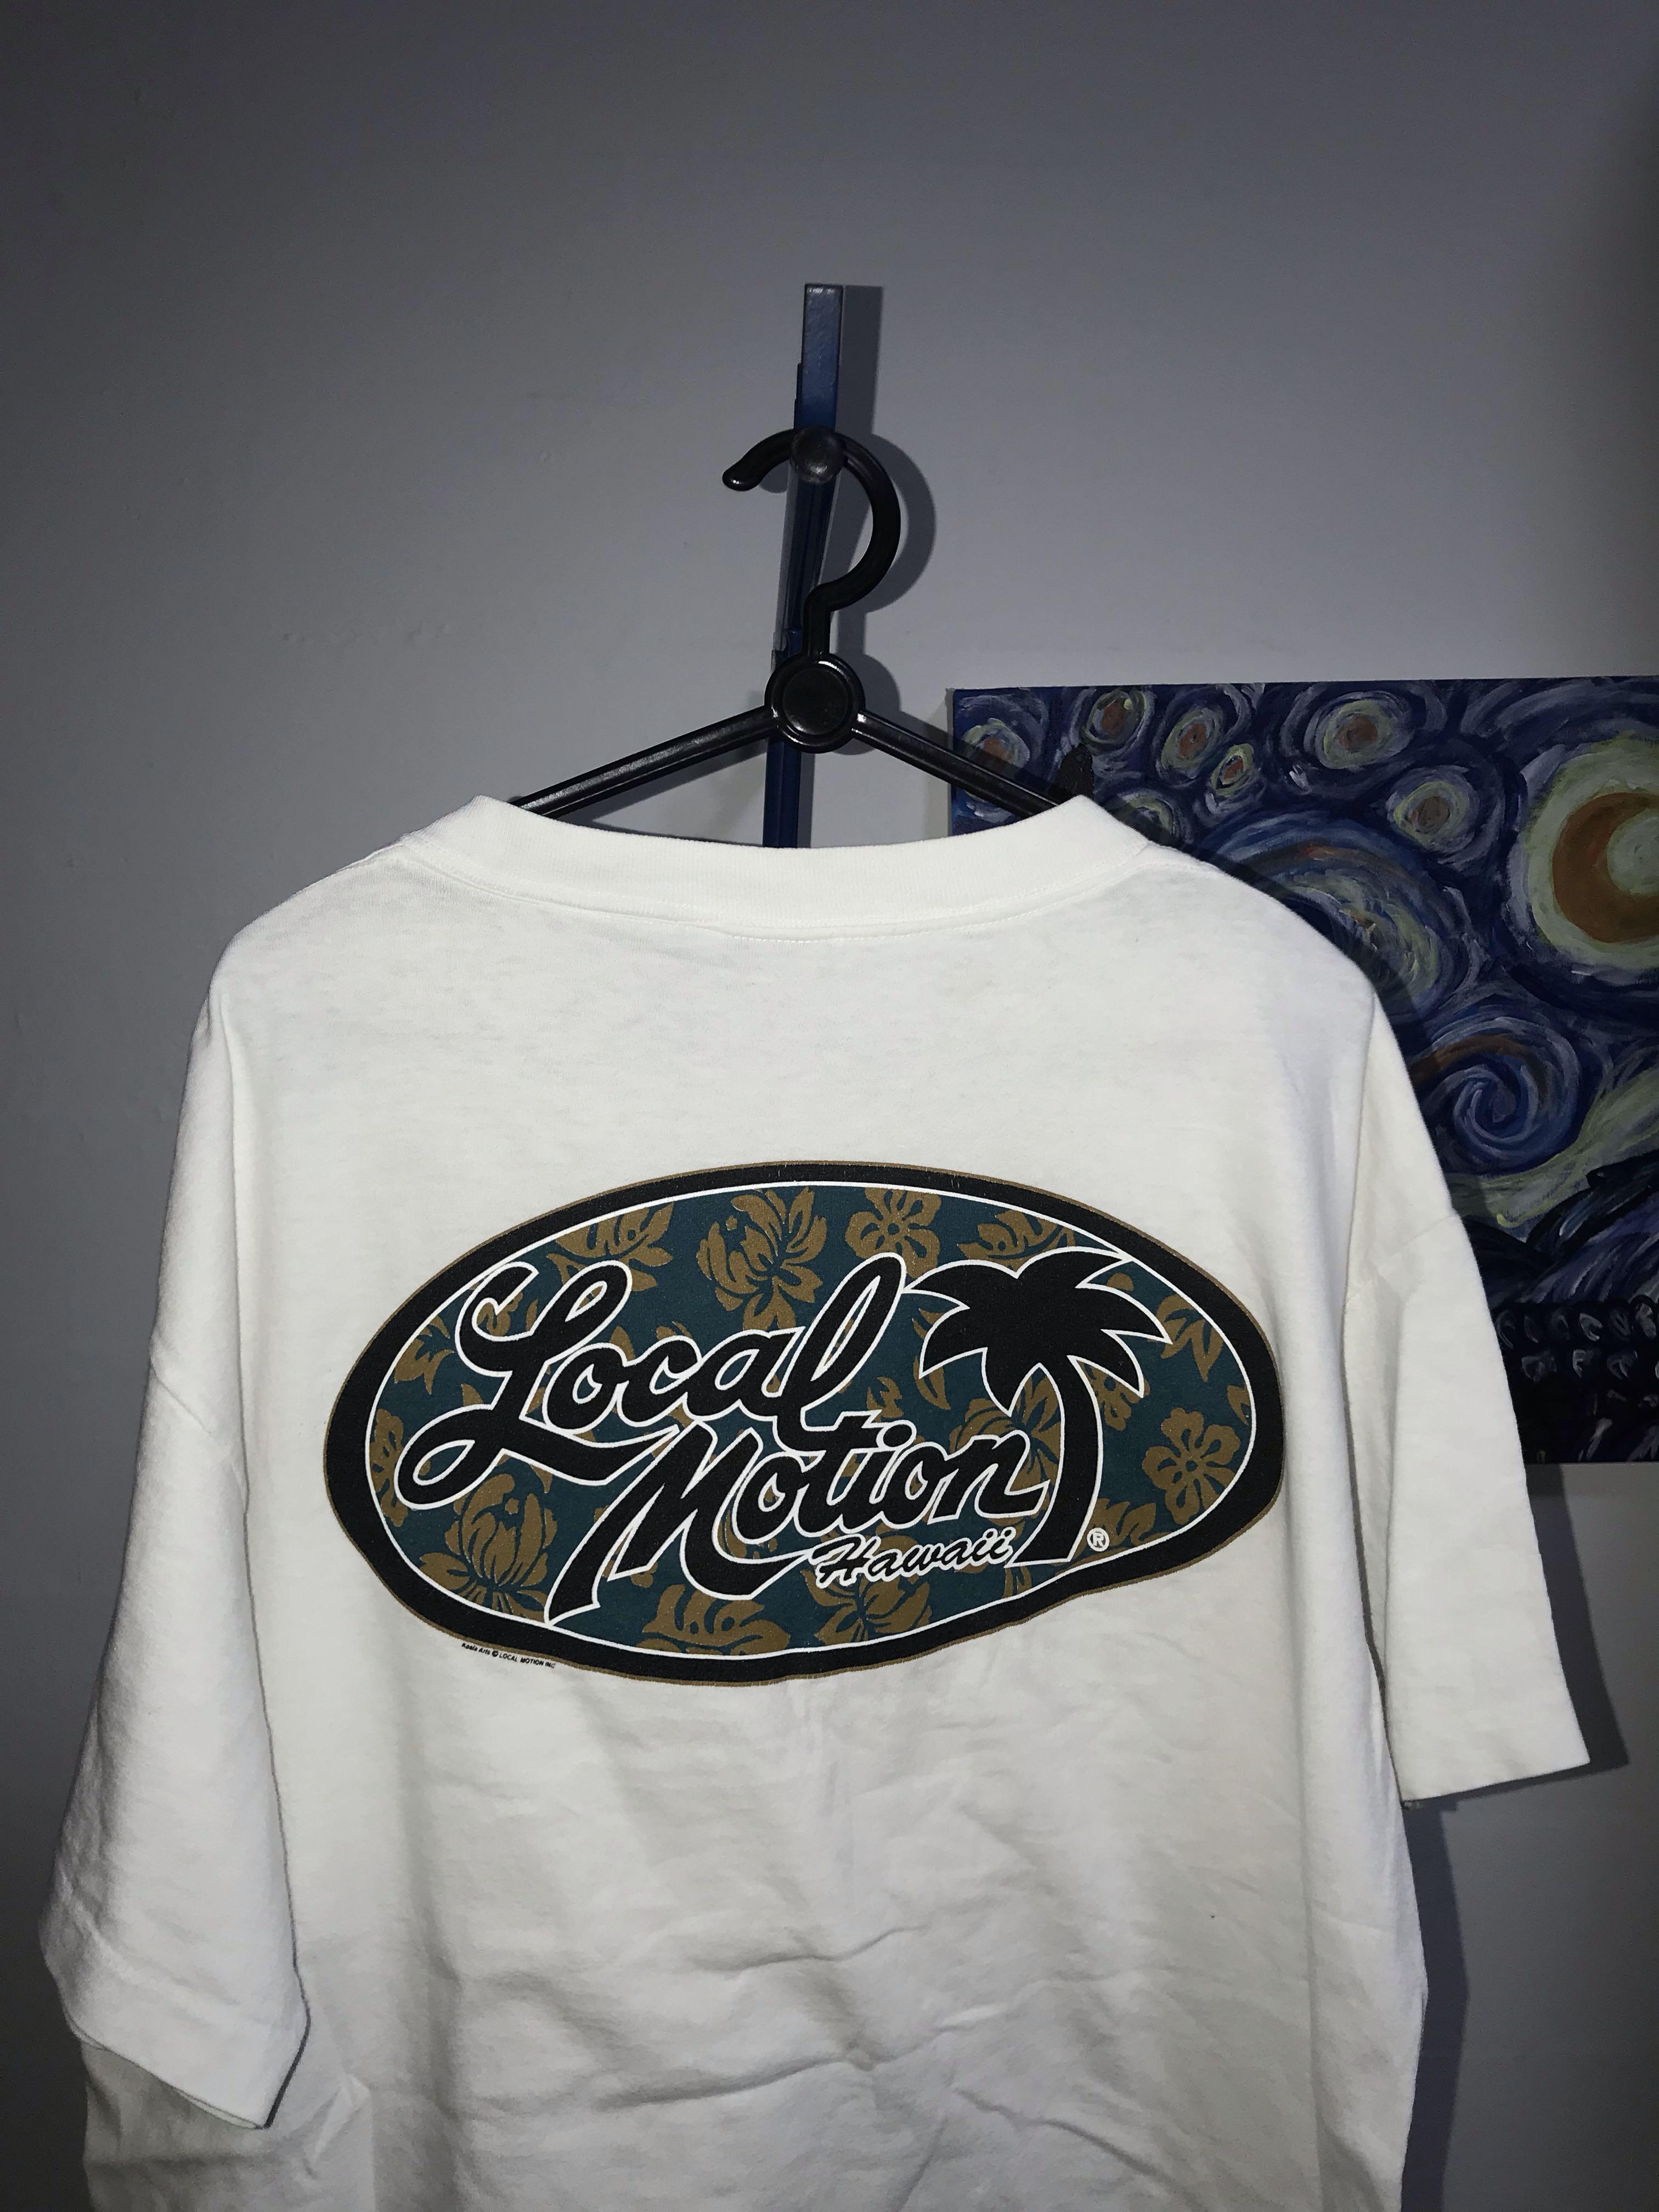 Vintage 90s Local Motion Made in Hawaii Tshirt Size L